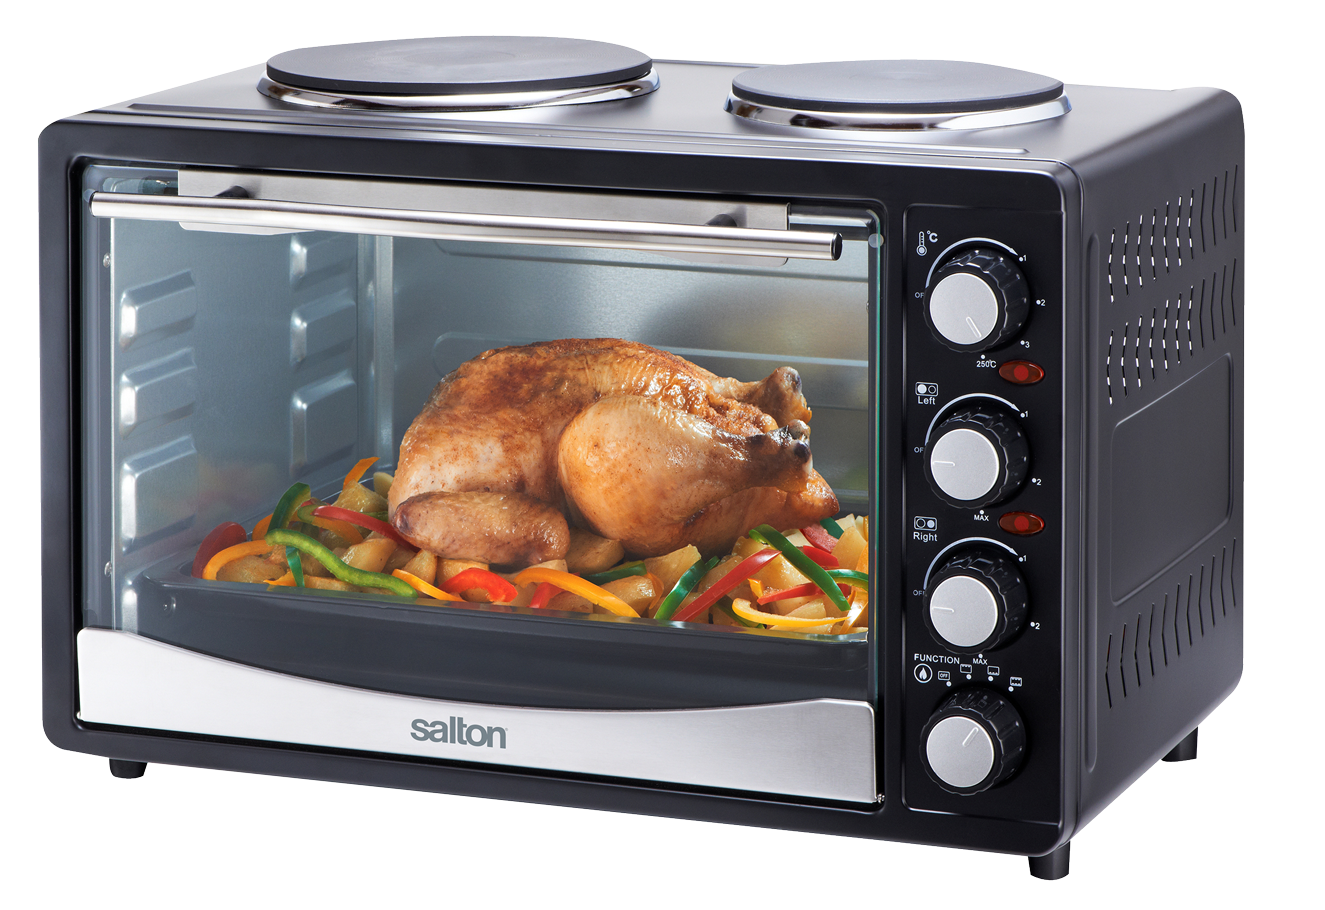 oven clipart microwave food